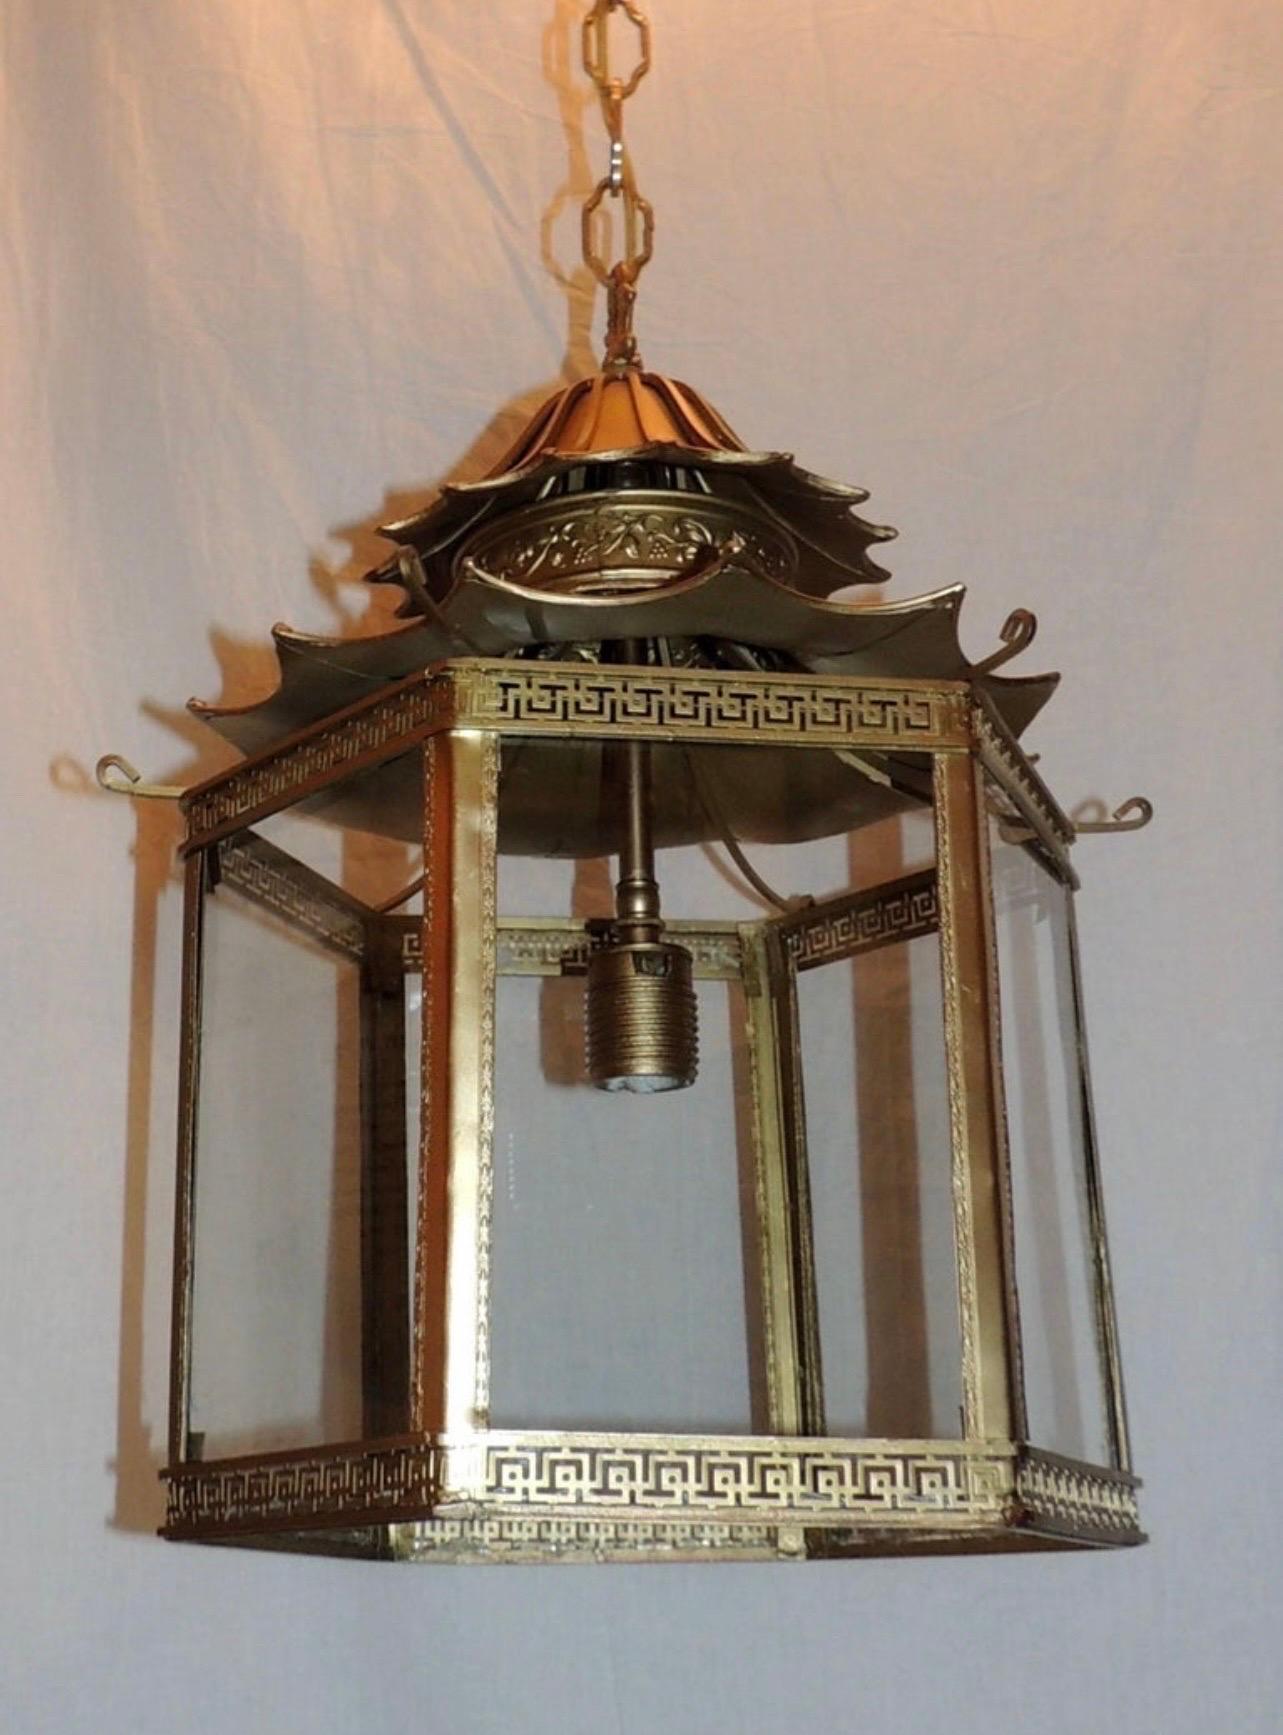 Wonderful French gilt bronze pagoda 6 panel Chinoiserie octagonal glass lantern fixture, rewired with a new socket taking up to 100 watts. This fixture comes with as much chain as you need as well as canopy and mounting hardware.